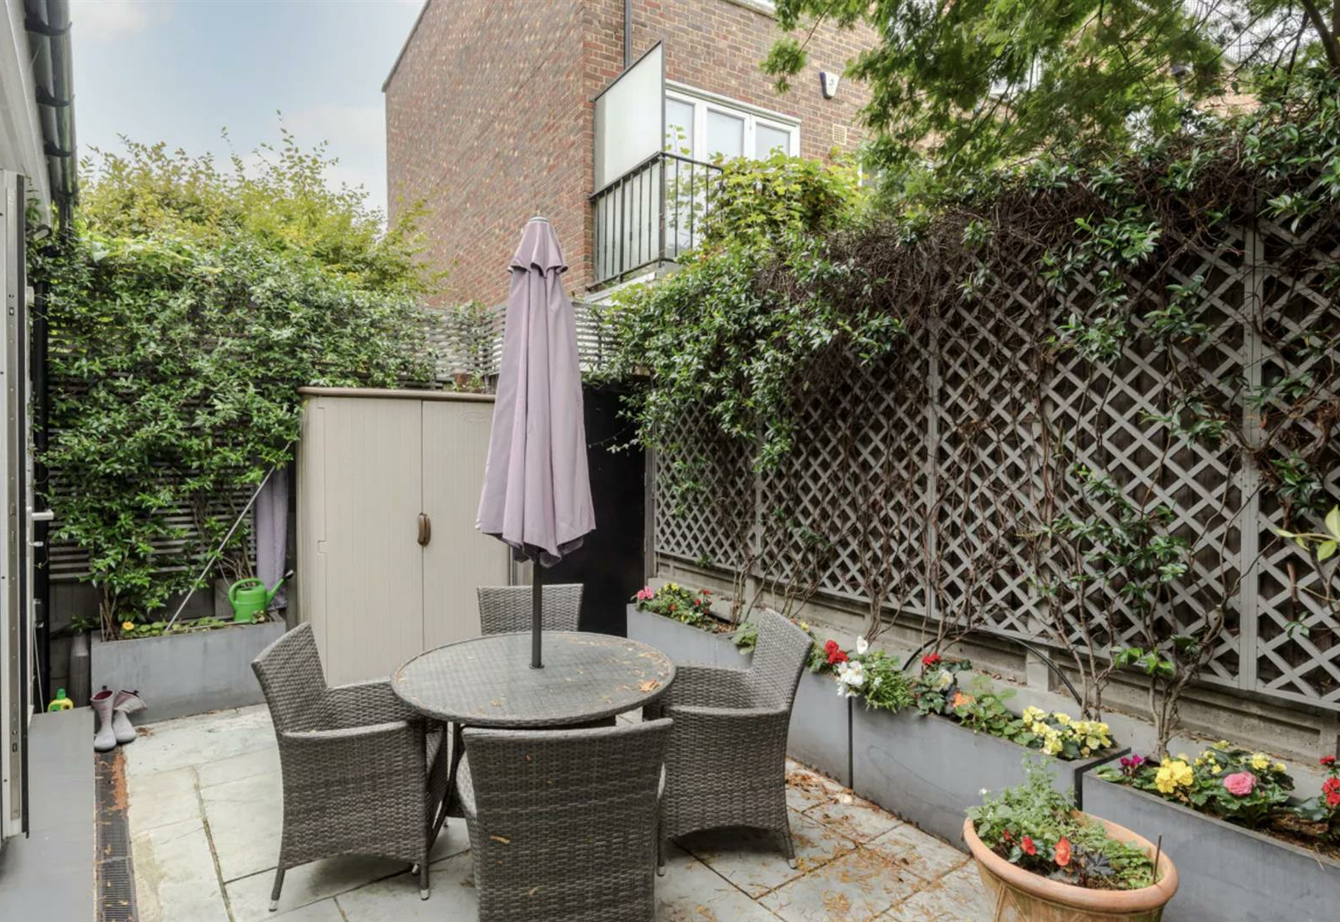 for-sale-abbey-road-london-410-view8